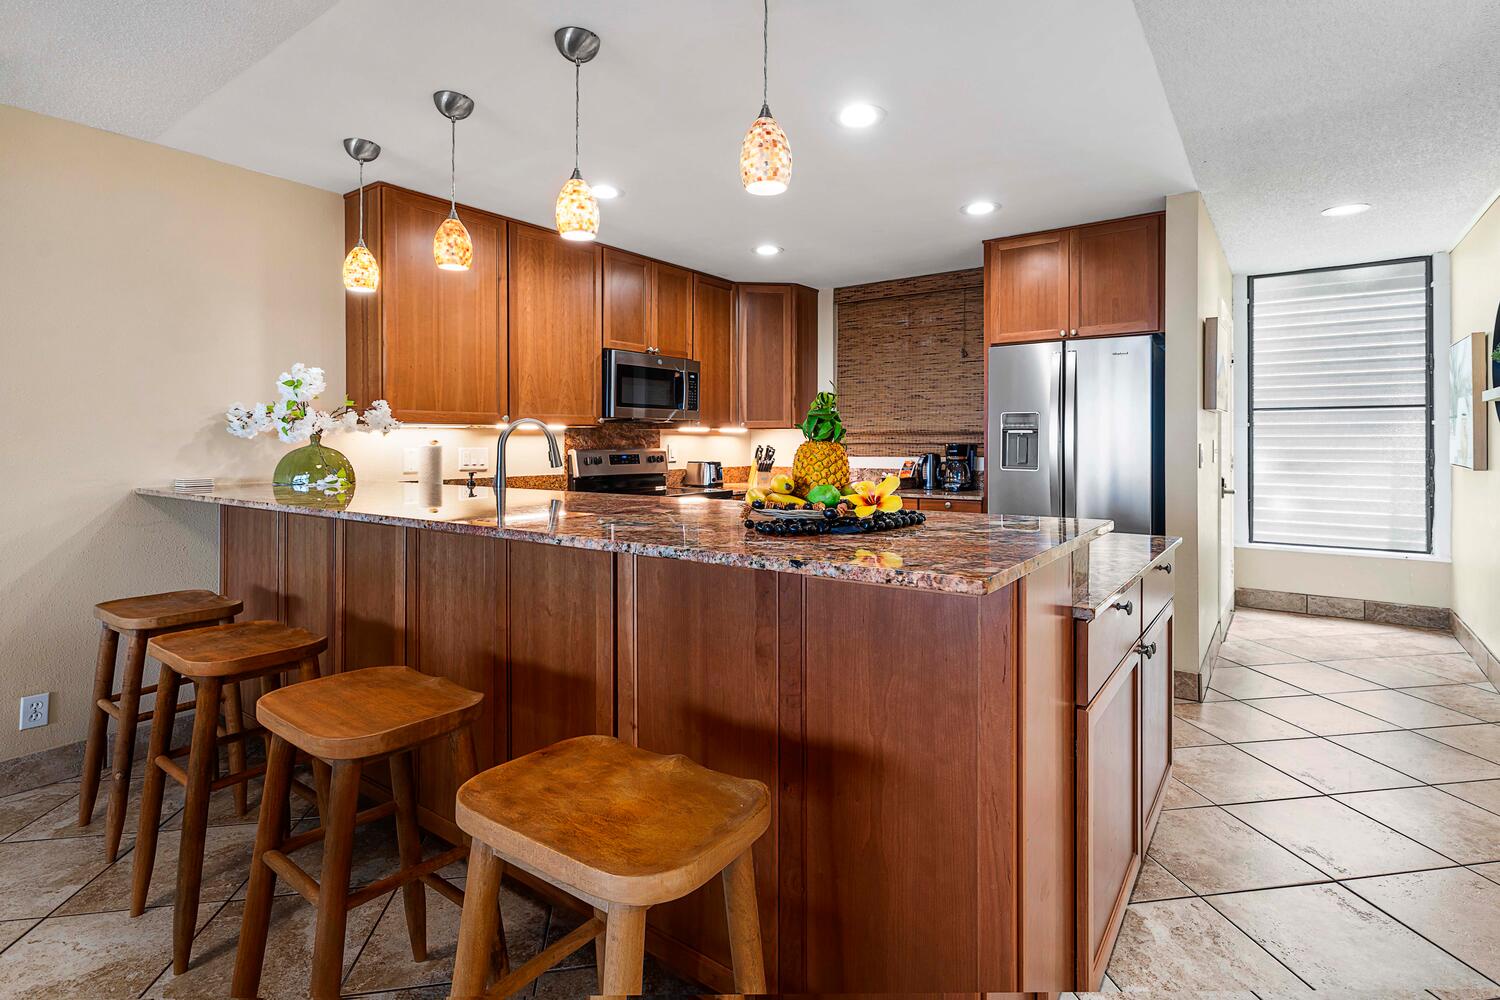 Kailua Kona Vacation Rentals, Keauhou Kona Surf & Racquet 1104 - Enjoy casual conversations over morning coffee at the kitchen island, which comfortably seats three.